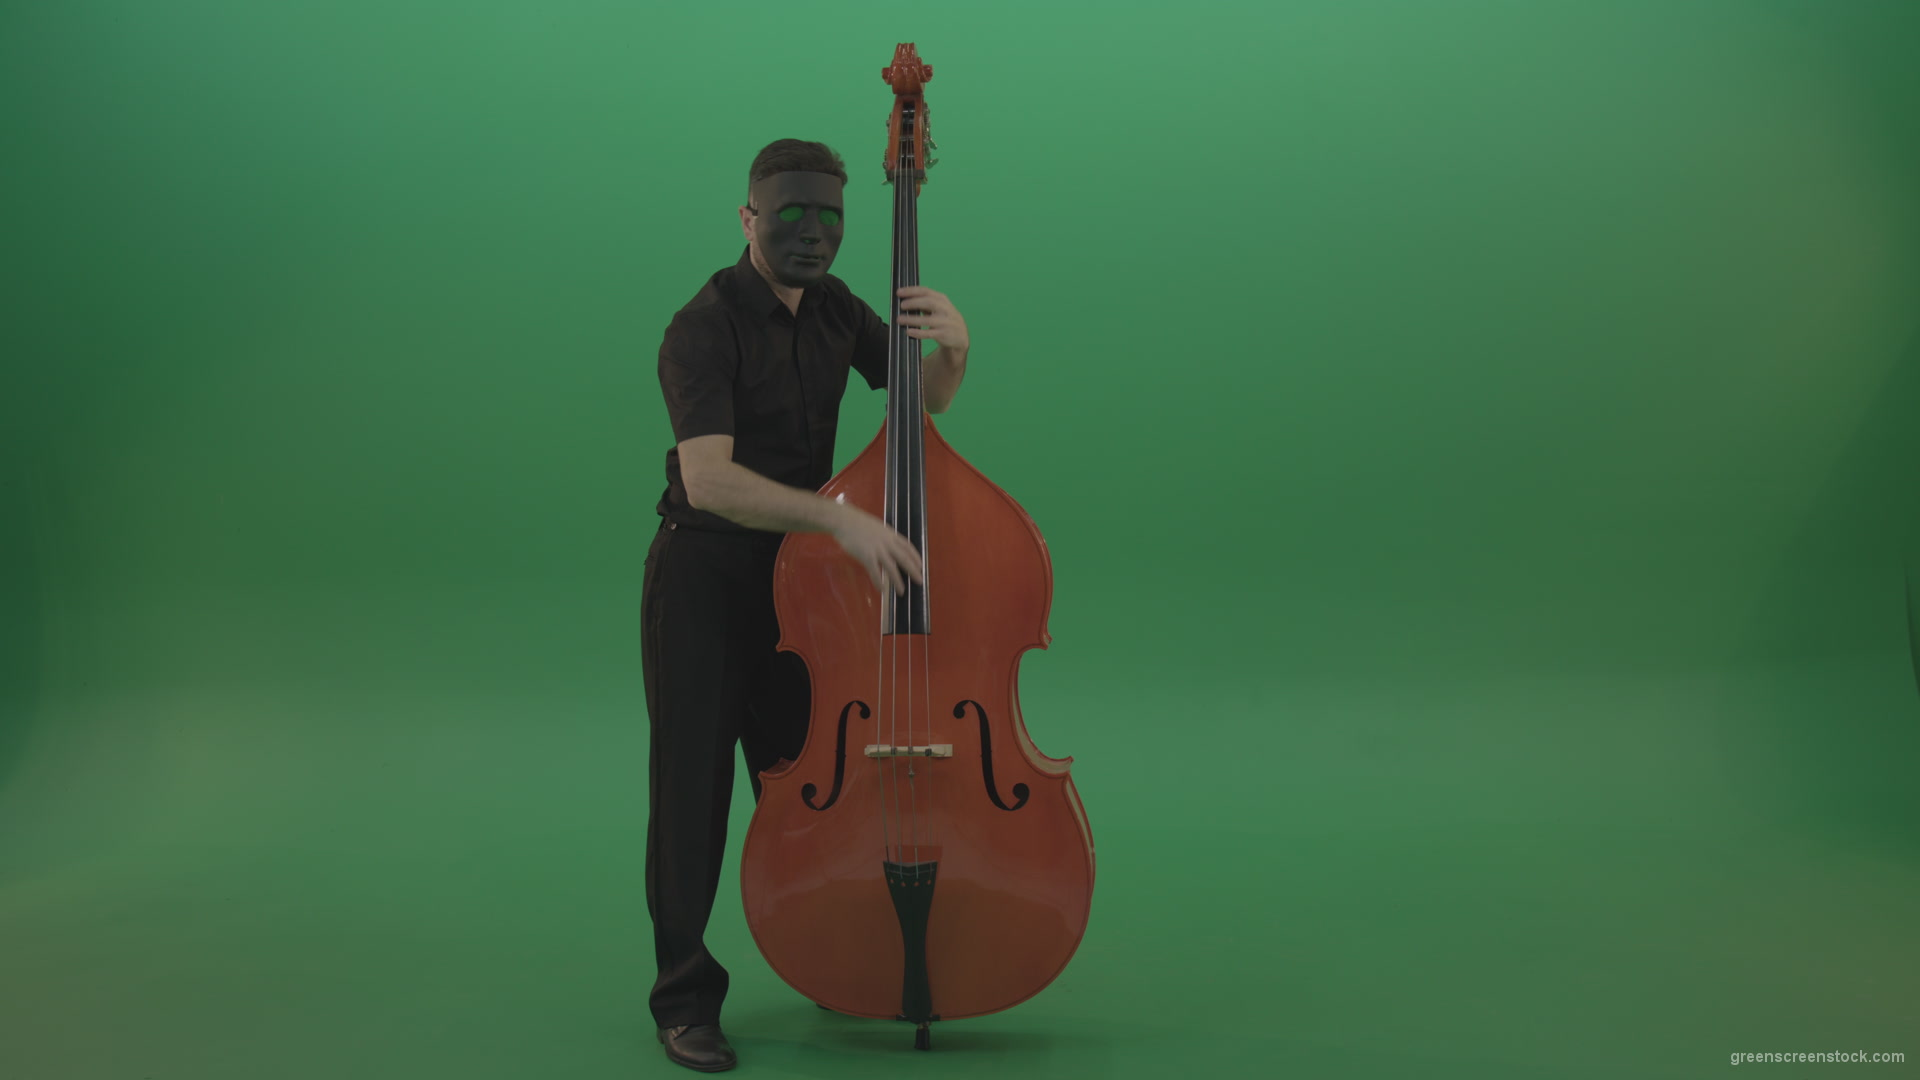 Full-size-man-in-black-gead-mask-with-chromakey-eyes-play-jazz-on-double-bass-String-music-instrument-isolated-on-green-screen_009 Green Screen Stock